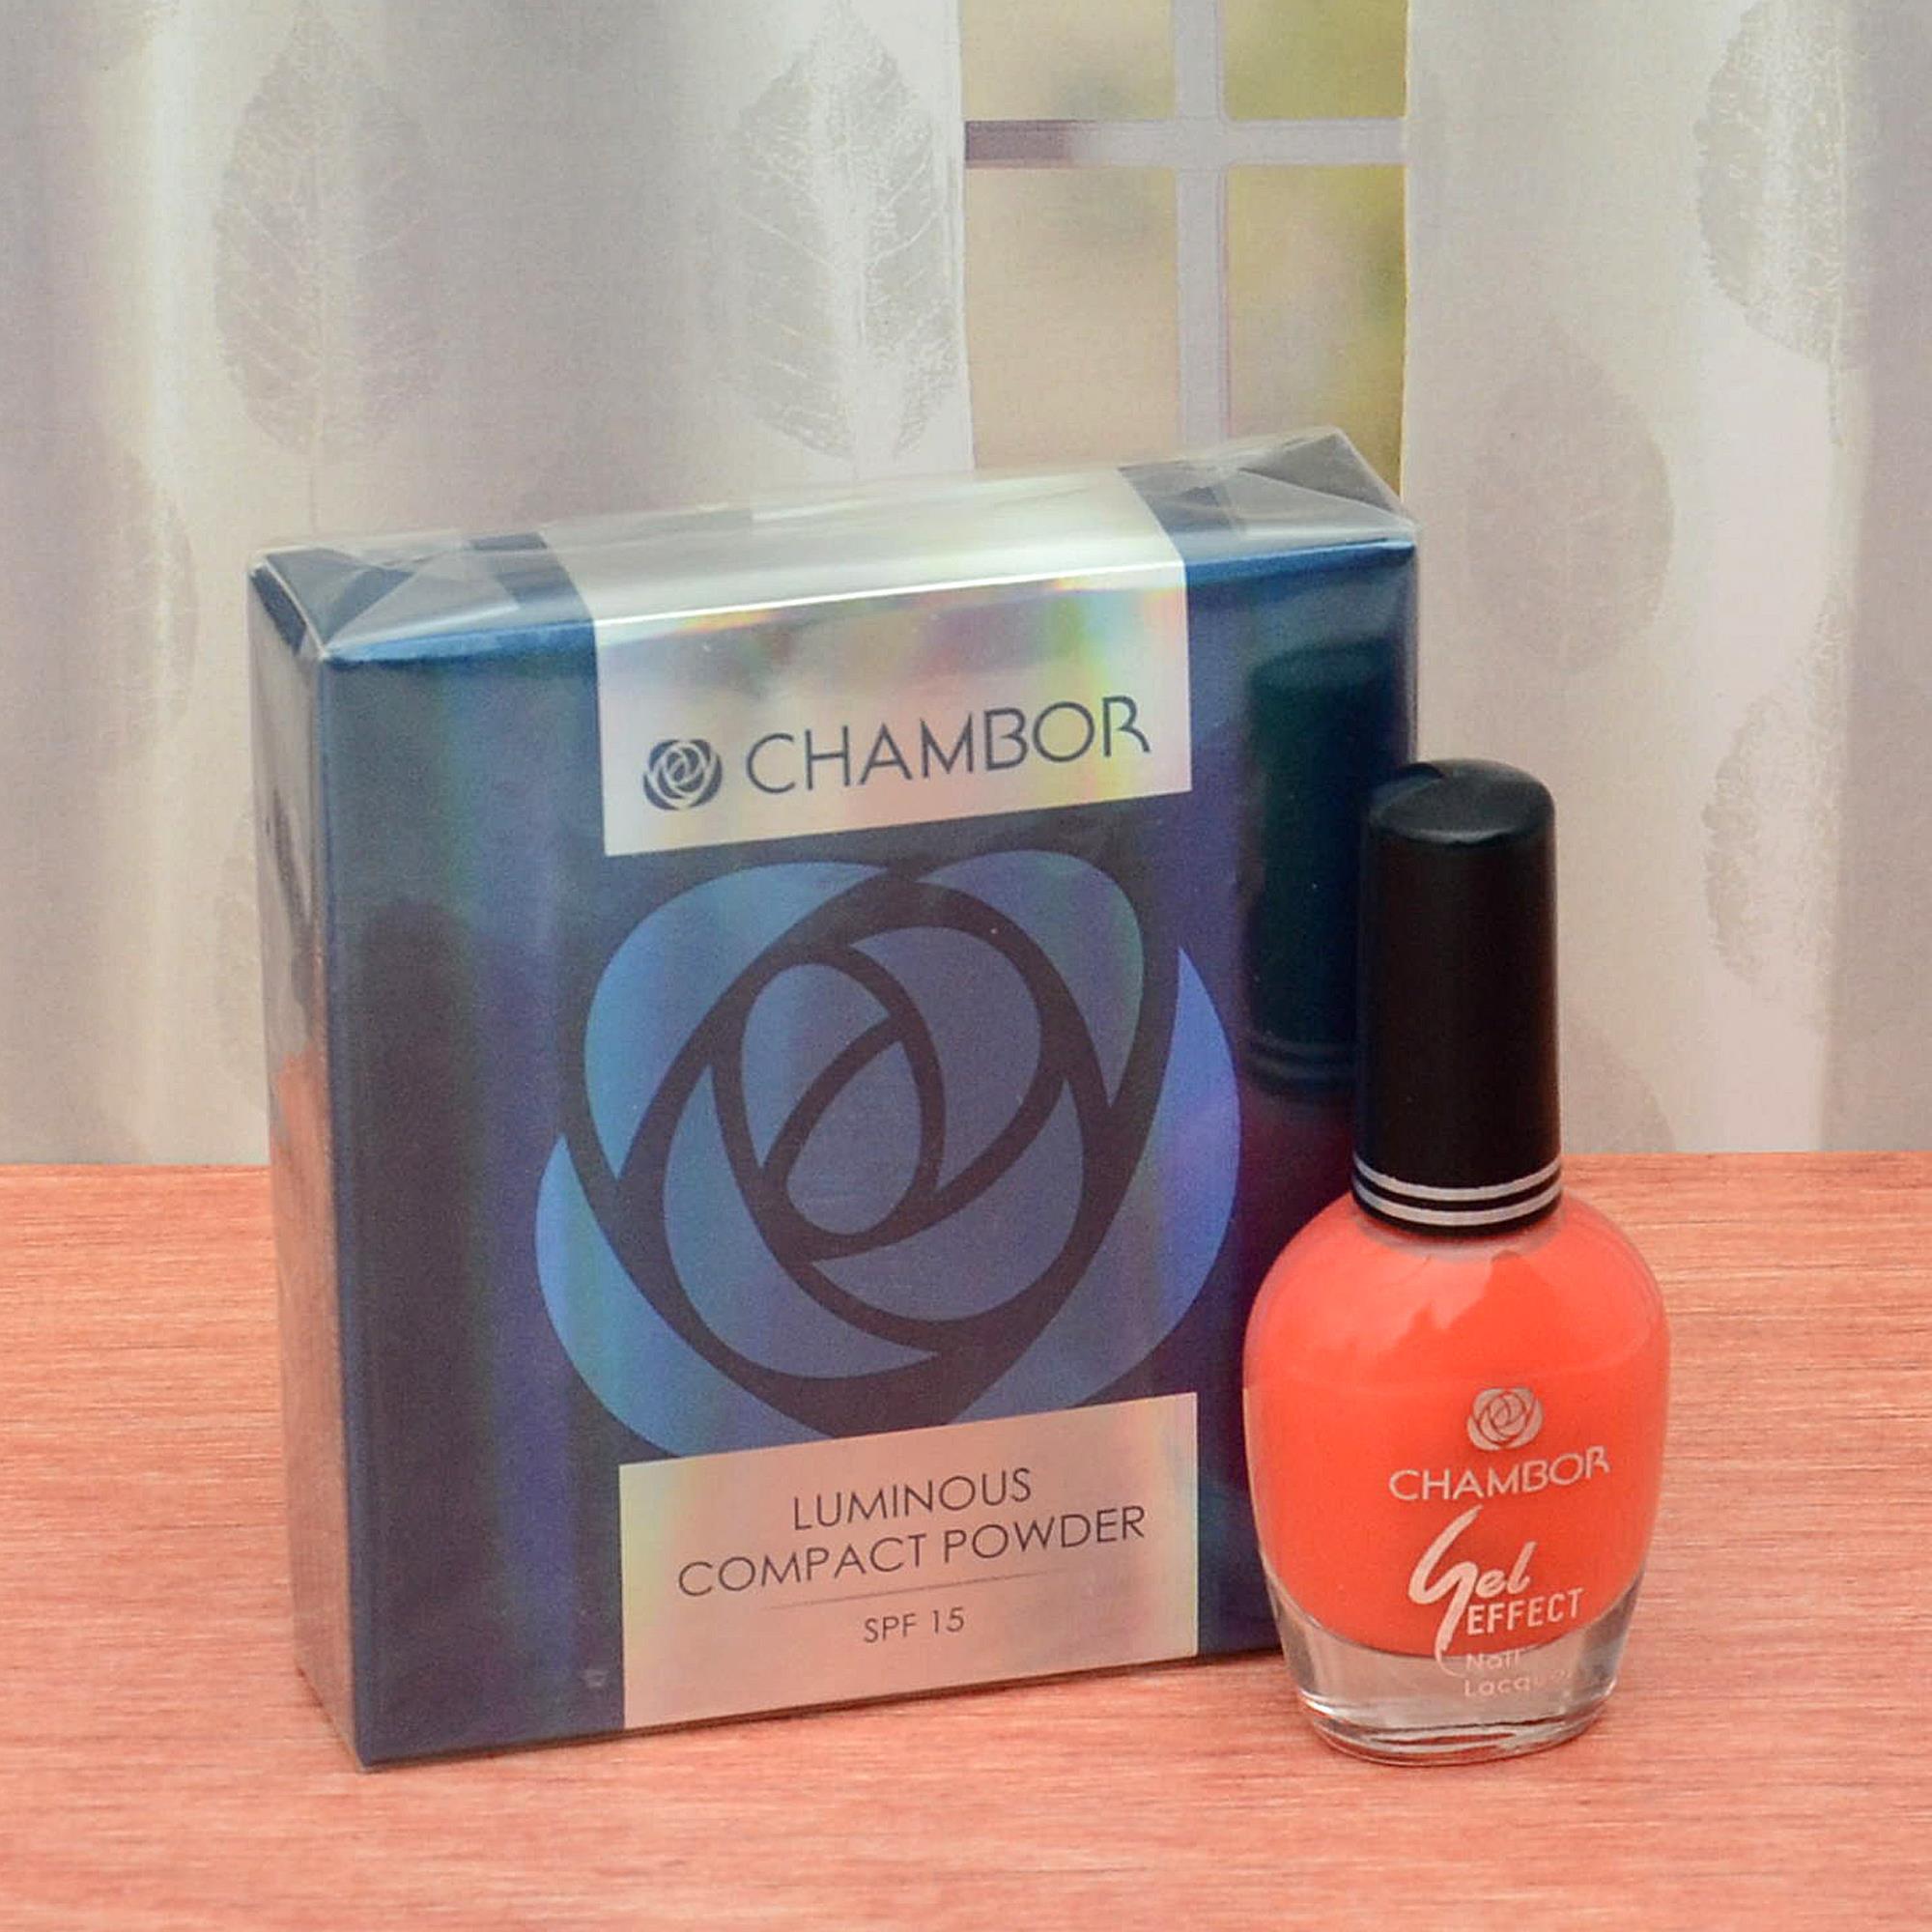 Buy CHAMBOR Gel Effect Nail Lacquer Online at Best Price of Rs 276.25 -  bigbasket